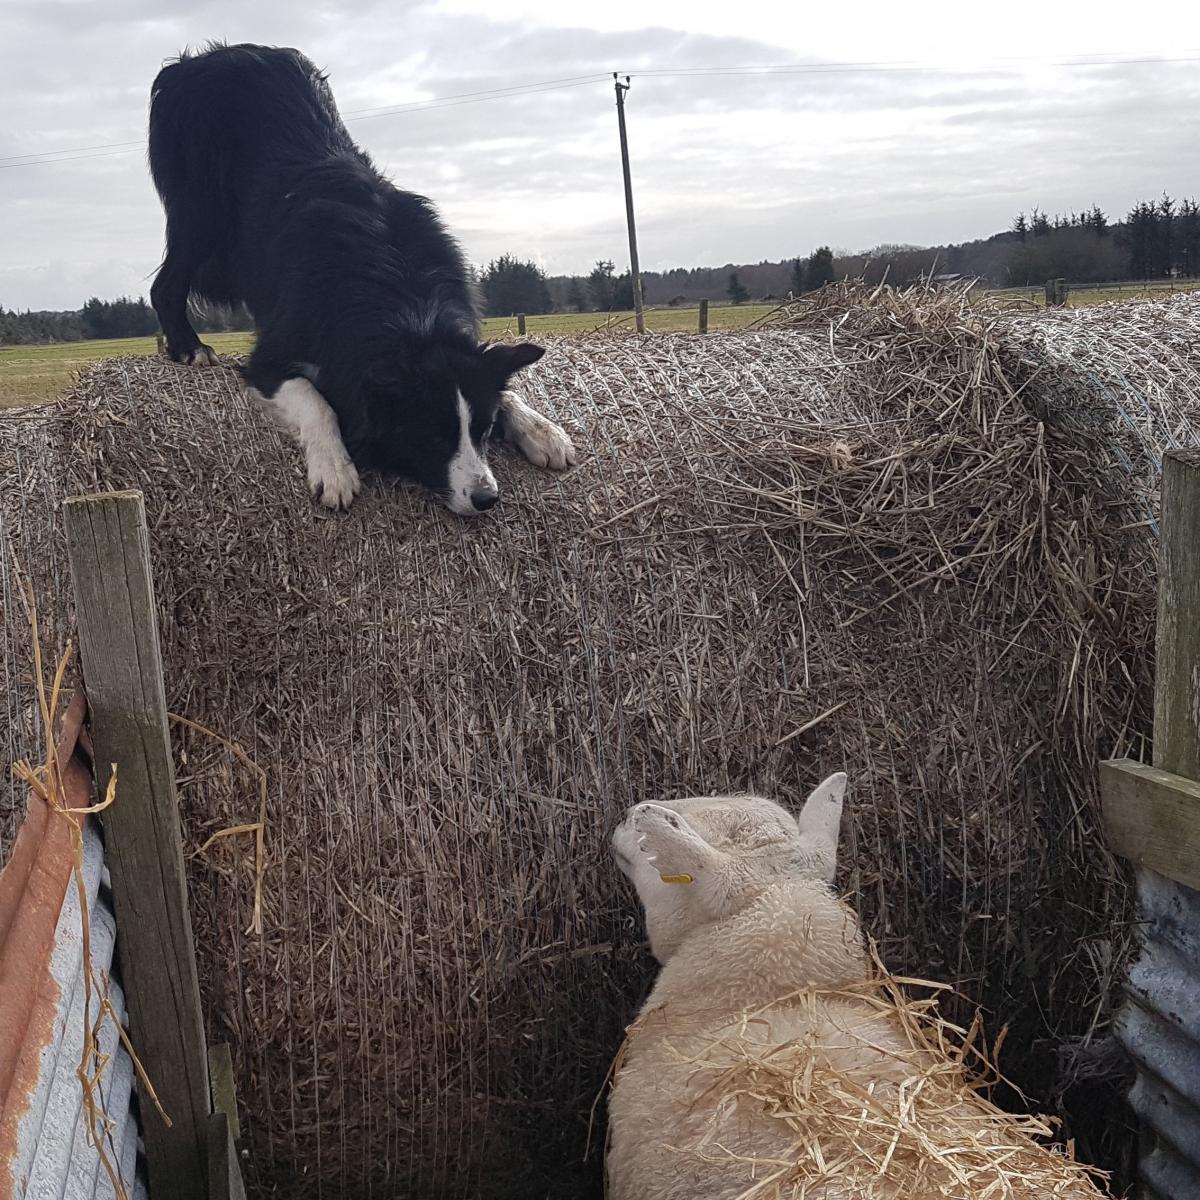 AnnaBirna McTaggart - my collie determidly looking at the sheep